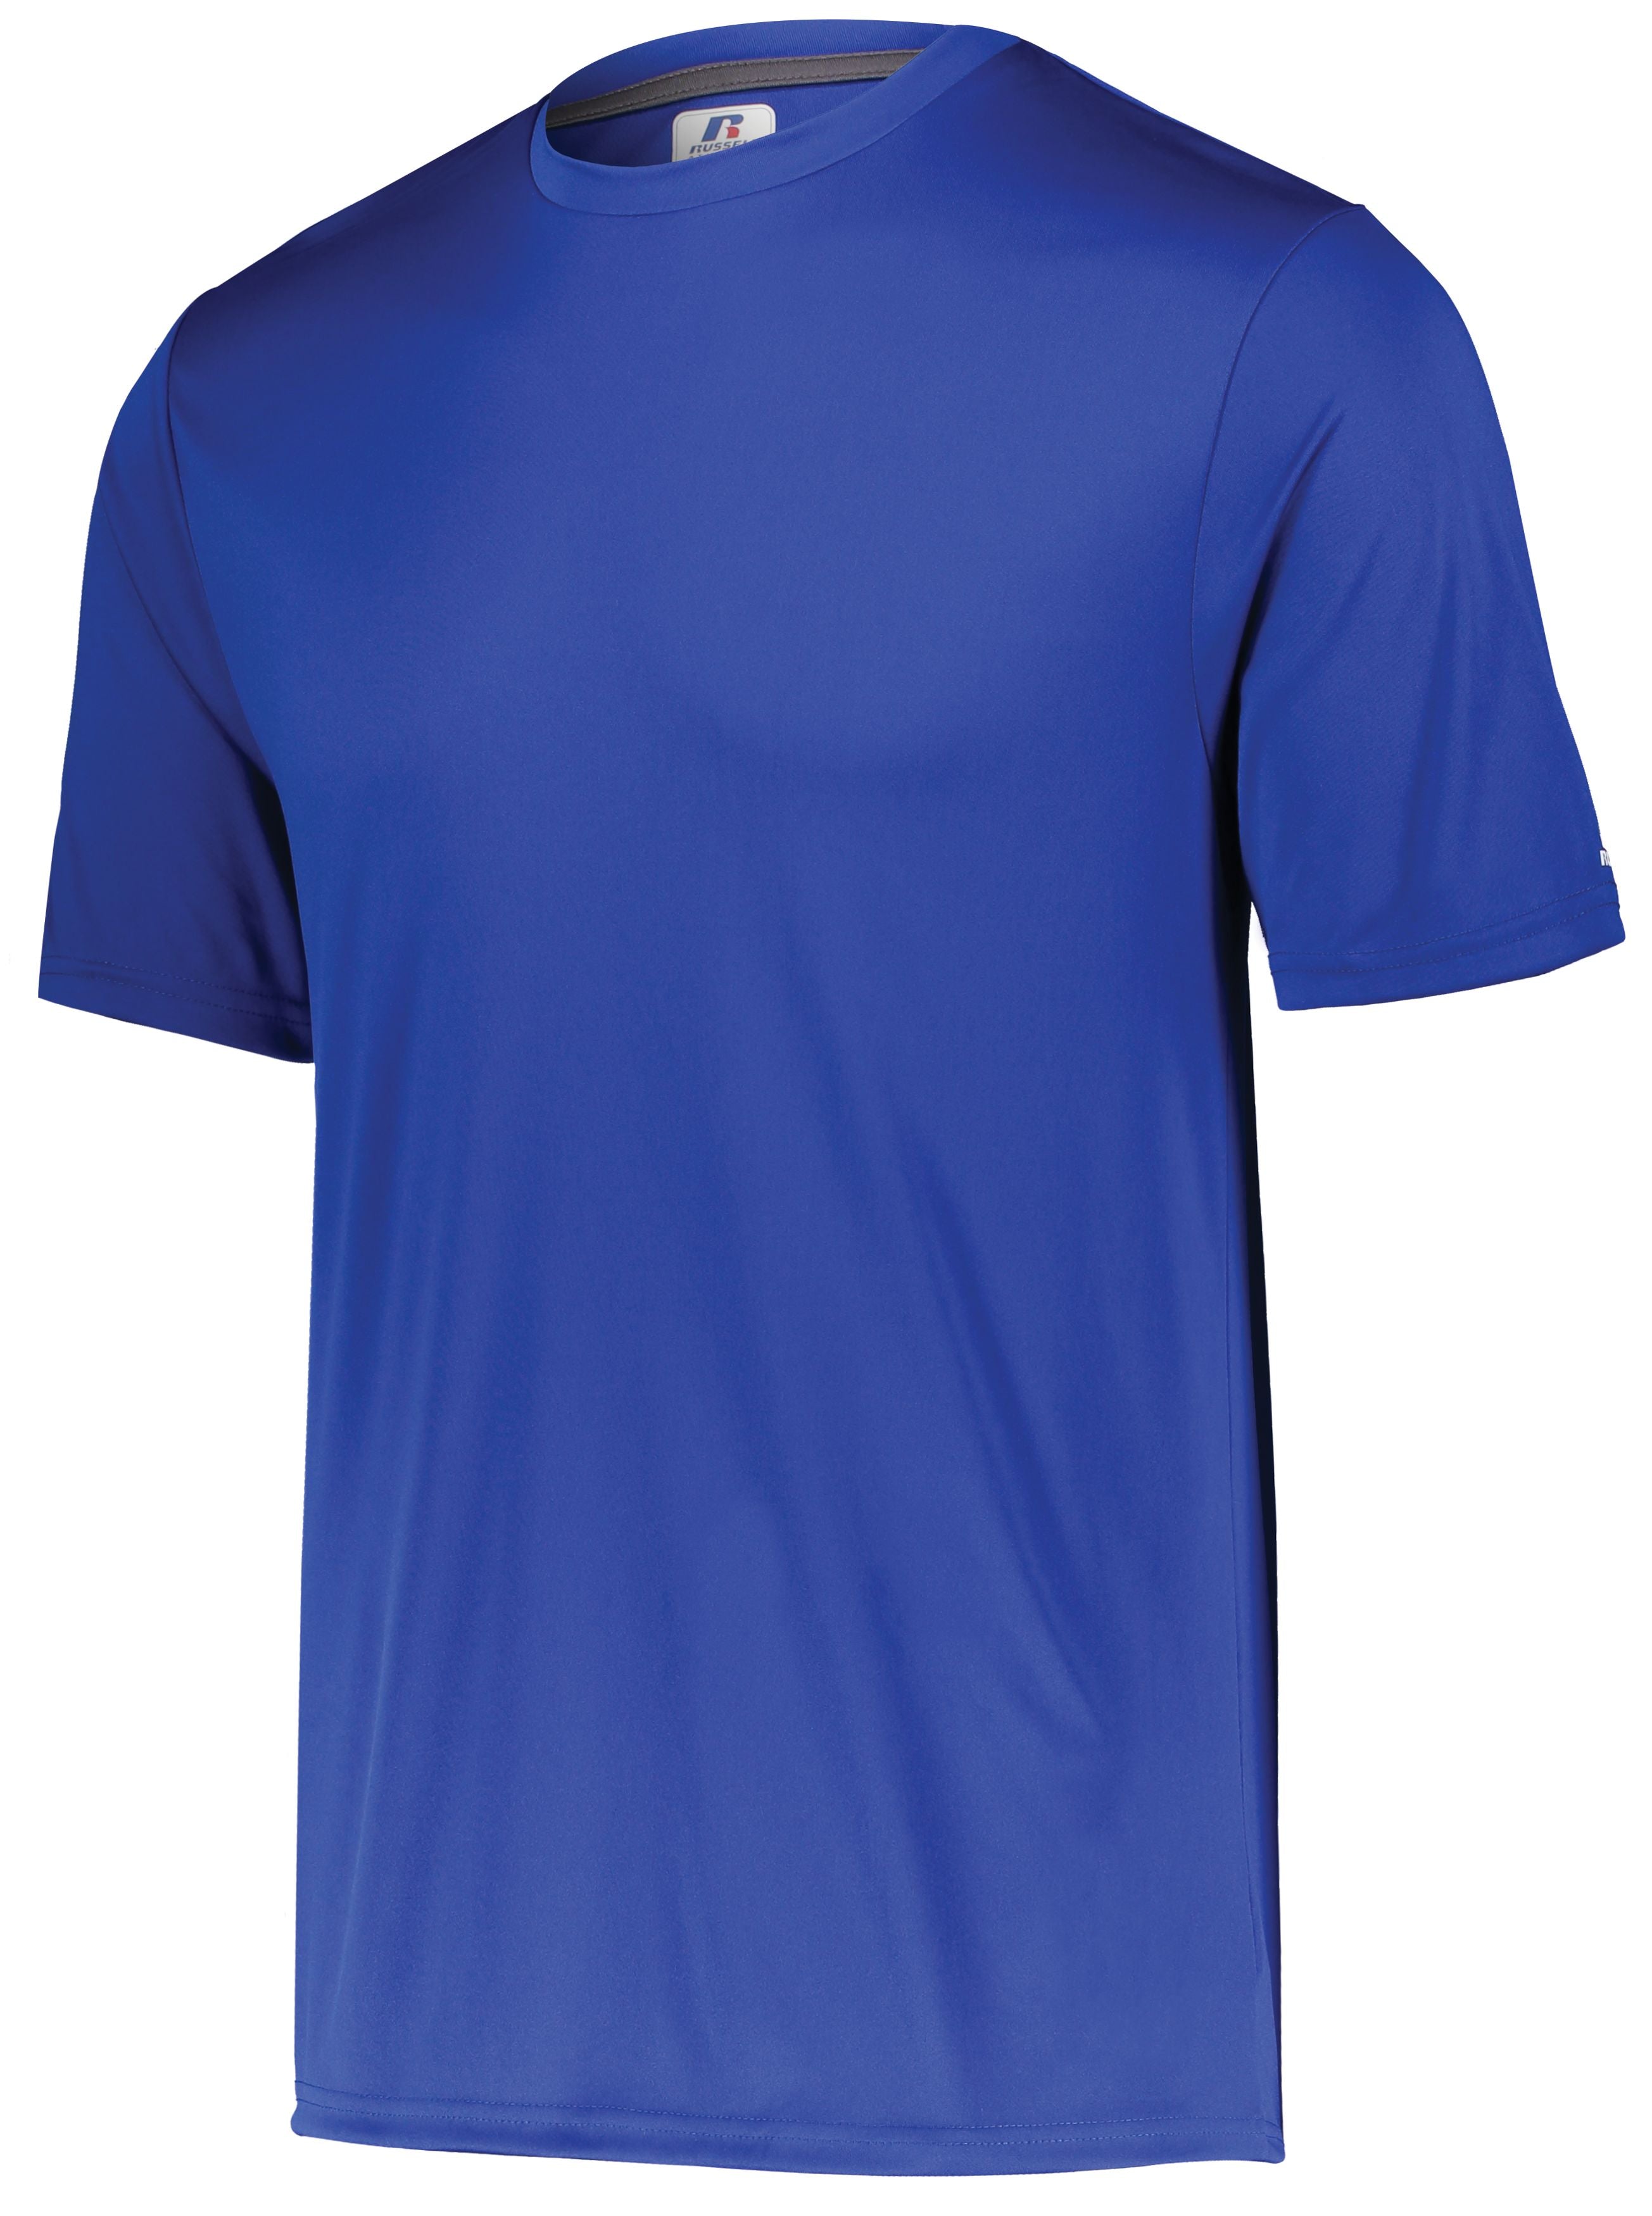 Russell Athletic Youth Dri-Power Core Performance Tee in Royal  -Part of the Youth, Youth-Tee-Shirt, T-Shirts, Russell-Athletic-Products, Shirts product lines at KanaleyCreations.com